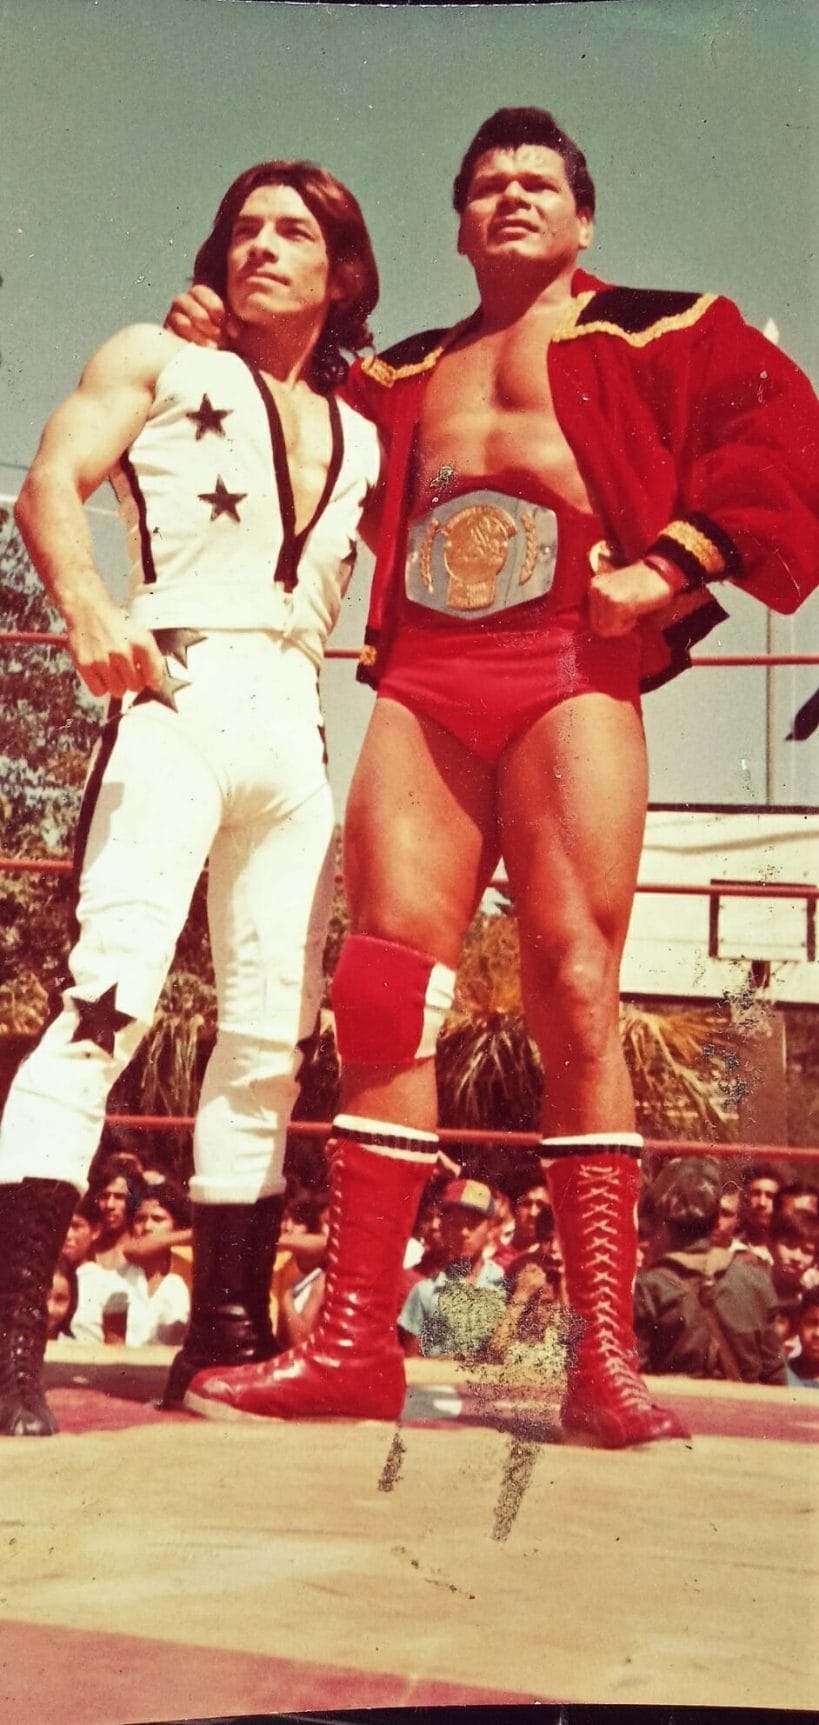 The Rayman (left) is shown here with Vikingo 1. They are two of El Salvador's most well-known wrestlers.